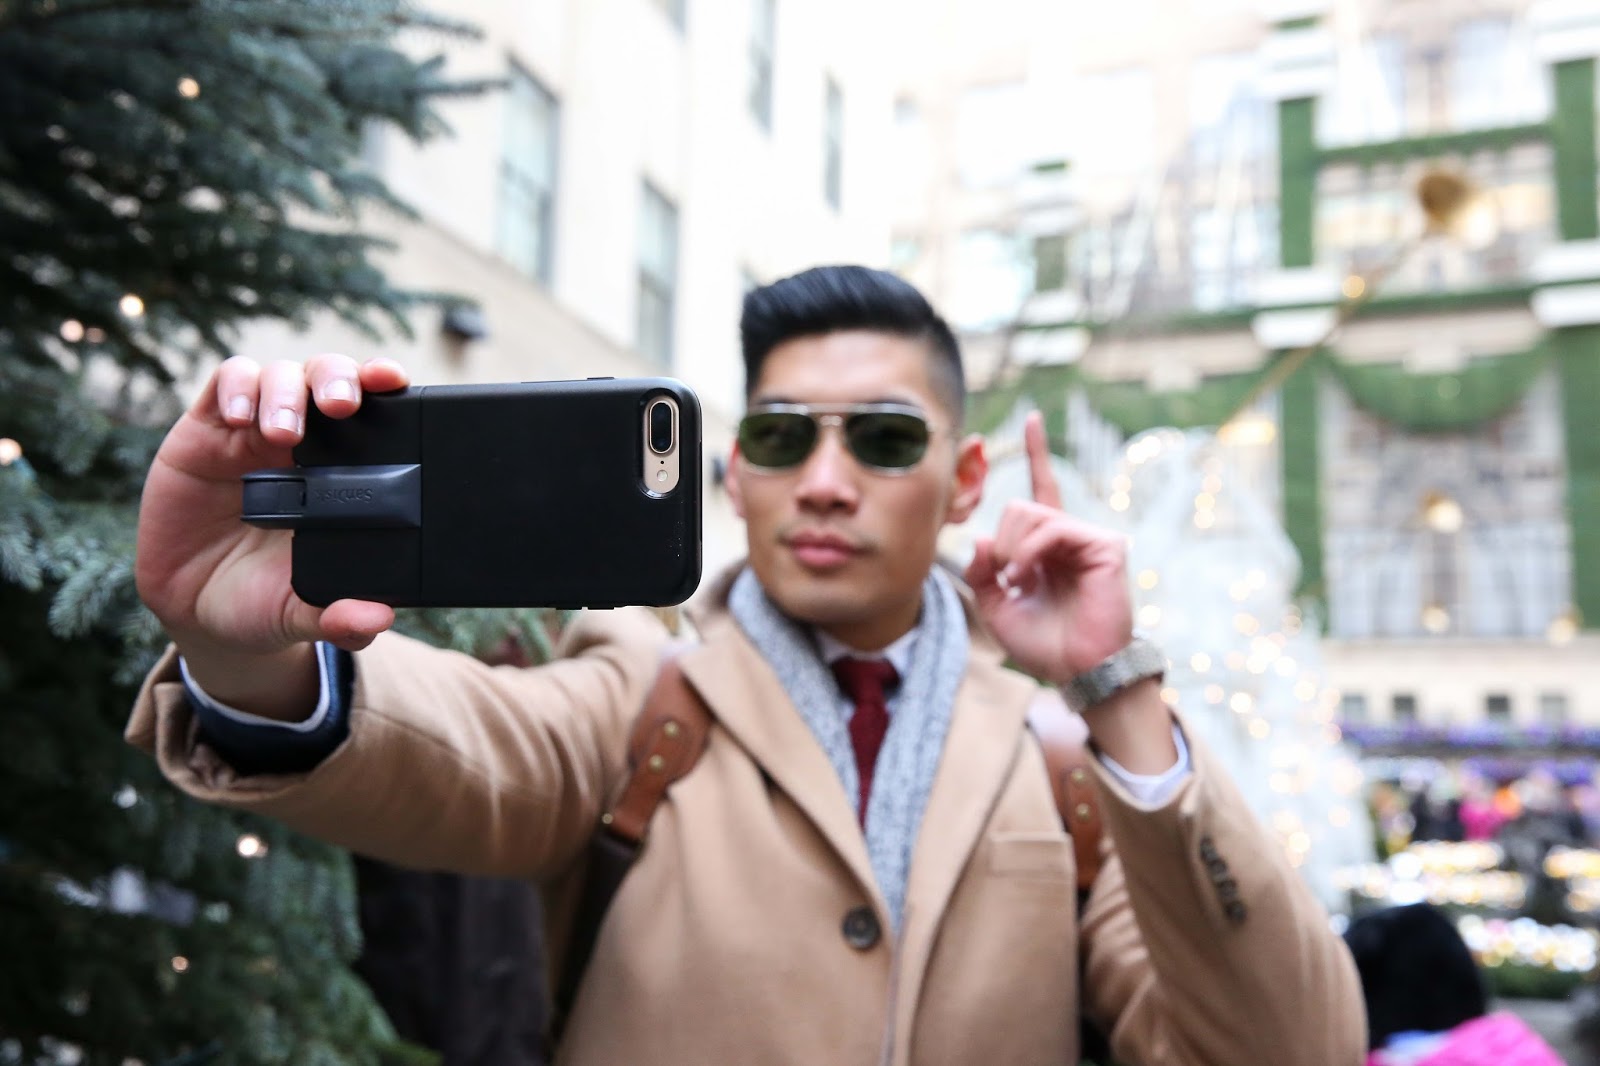 Levitate Style menswear NYC Holiday with Otterbox